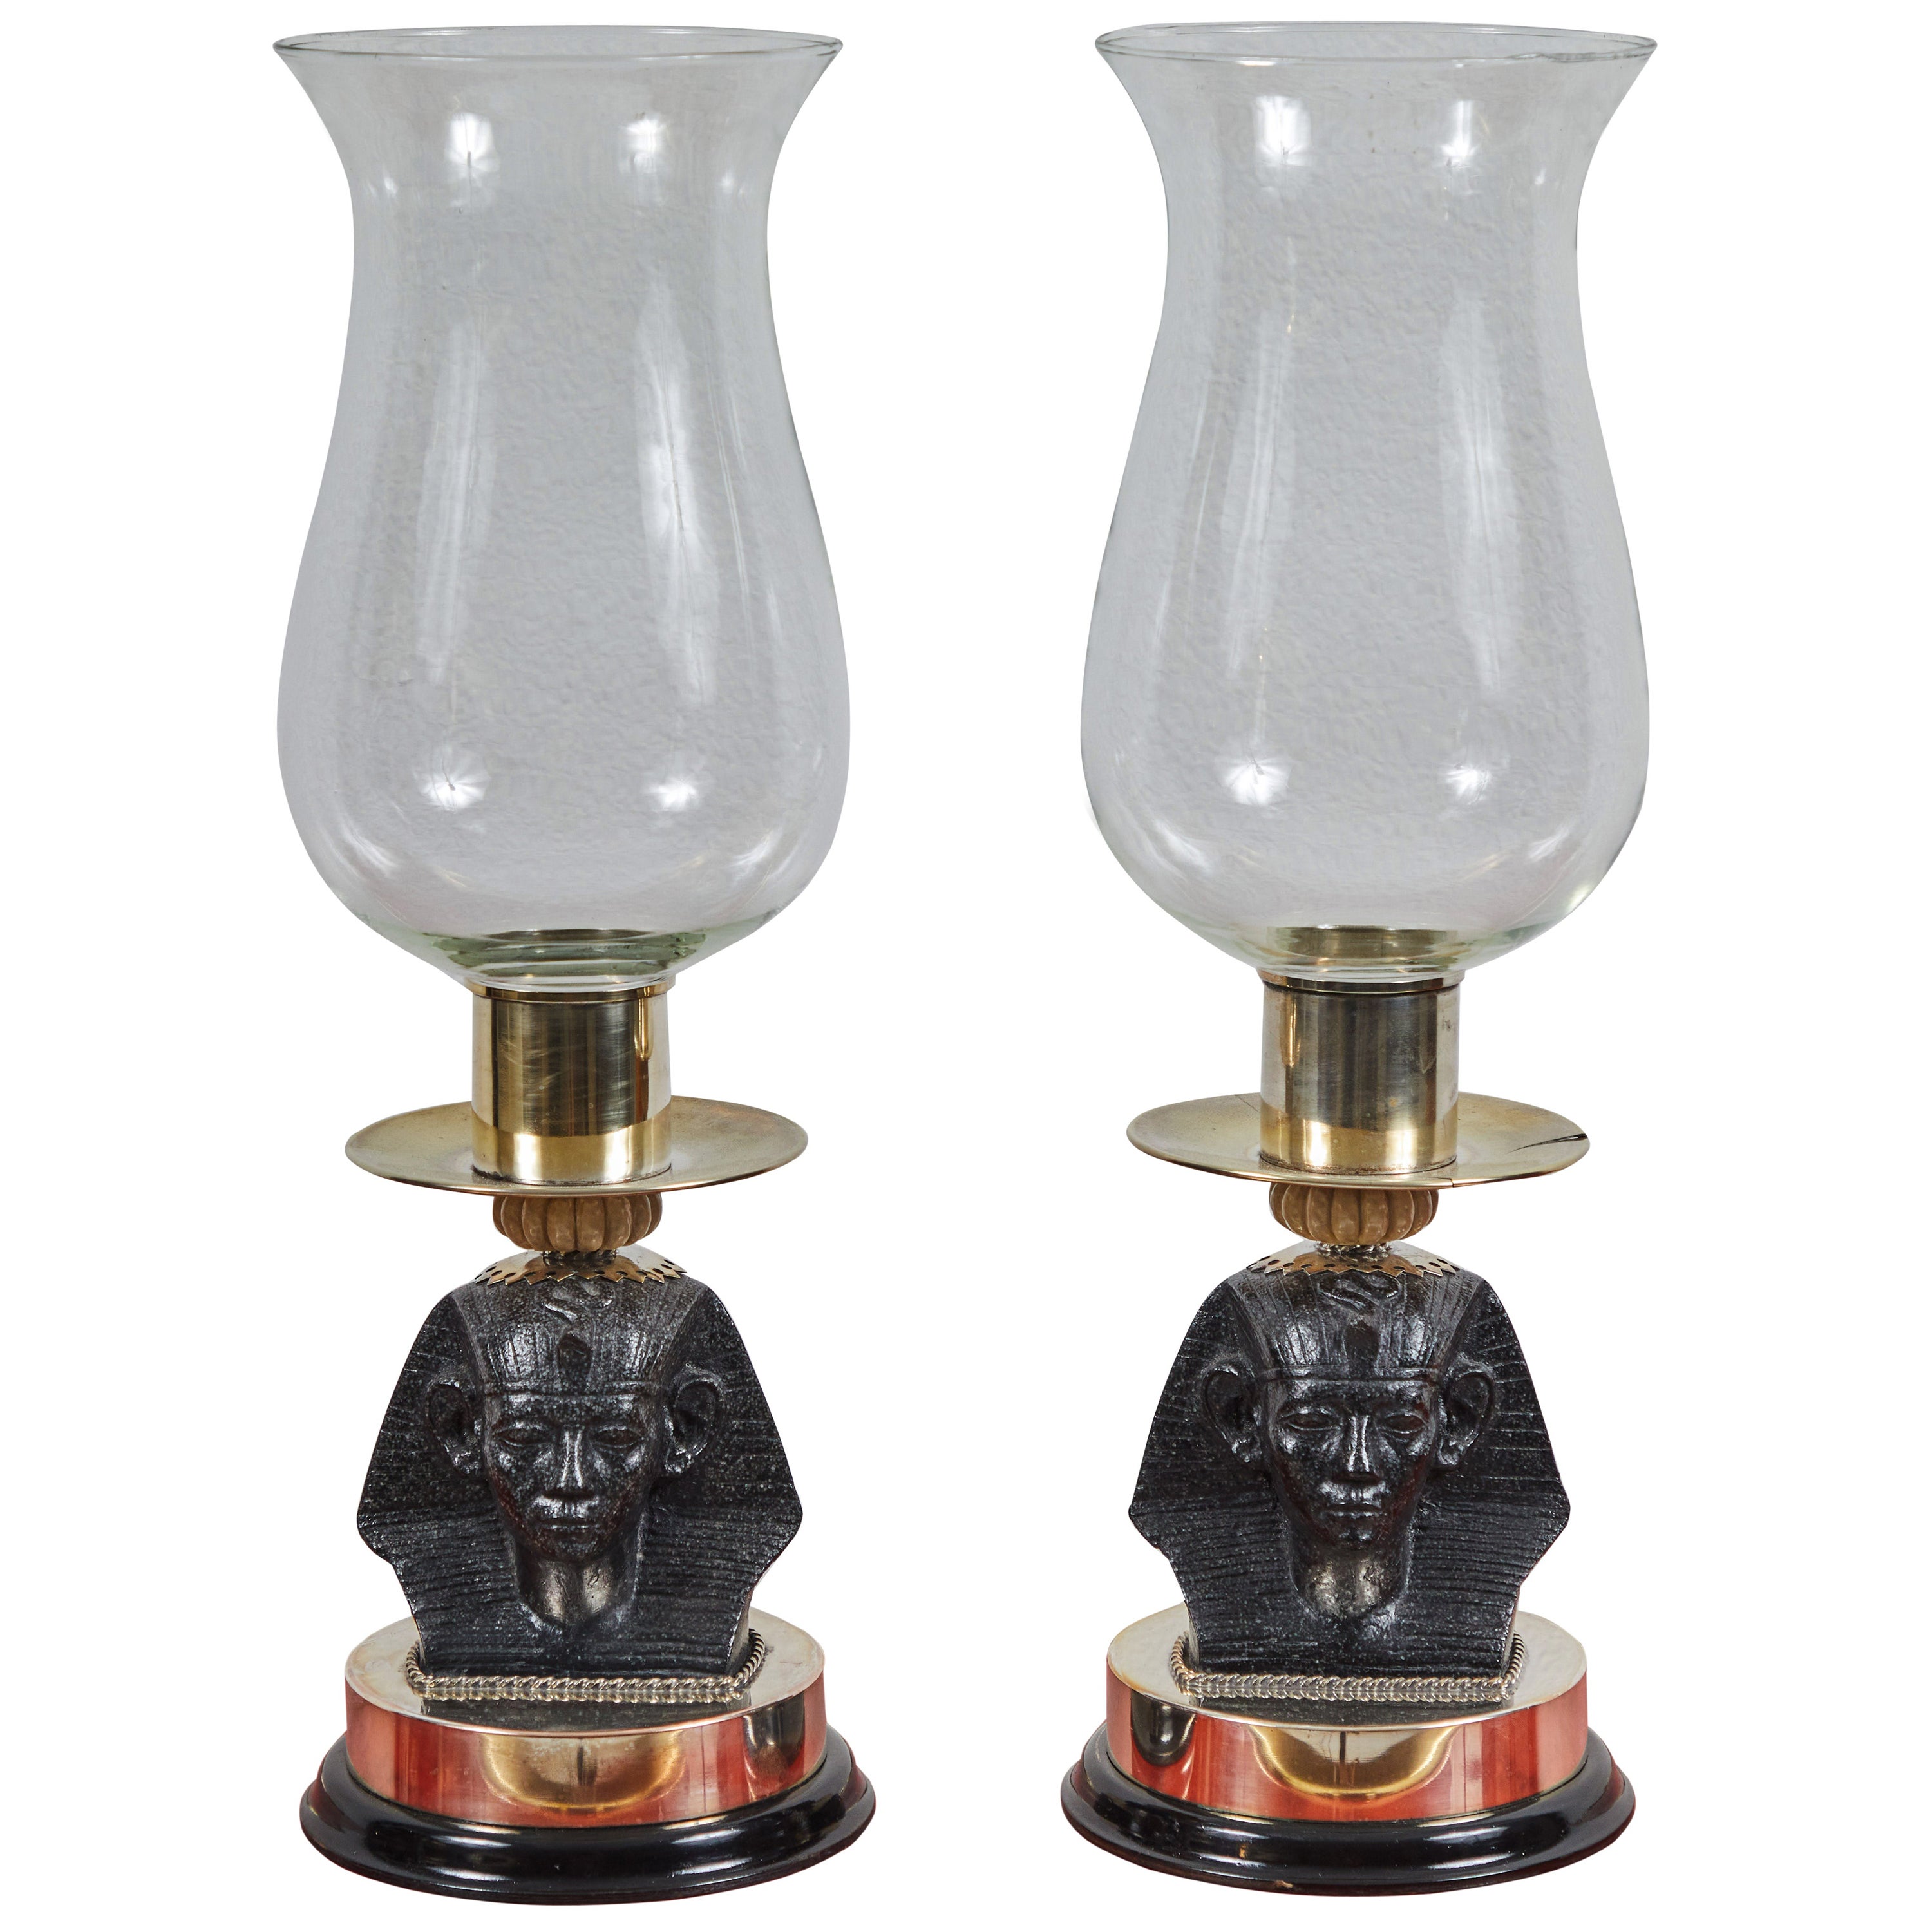 Pair of Egyptian Style Hurricane Glass Candle Holders by Antony Redmile